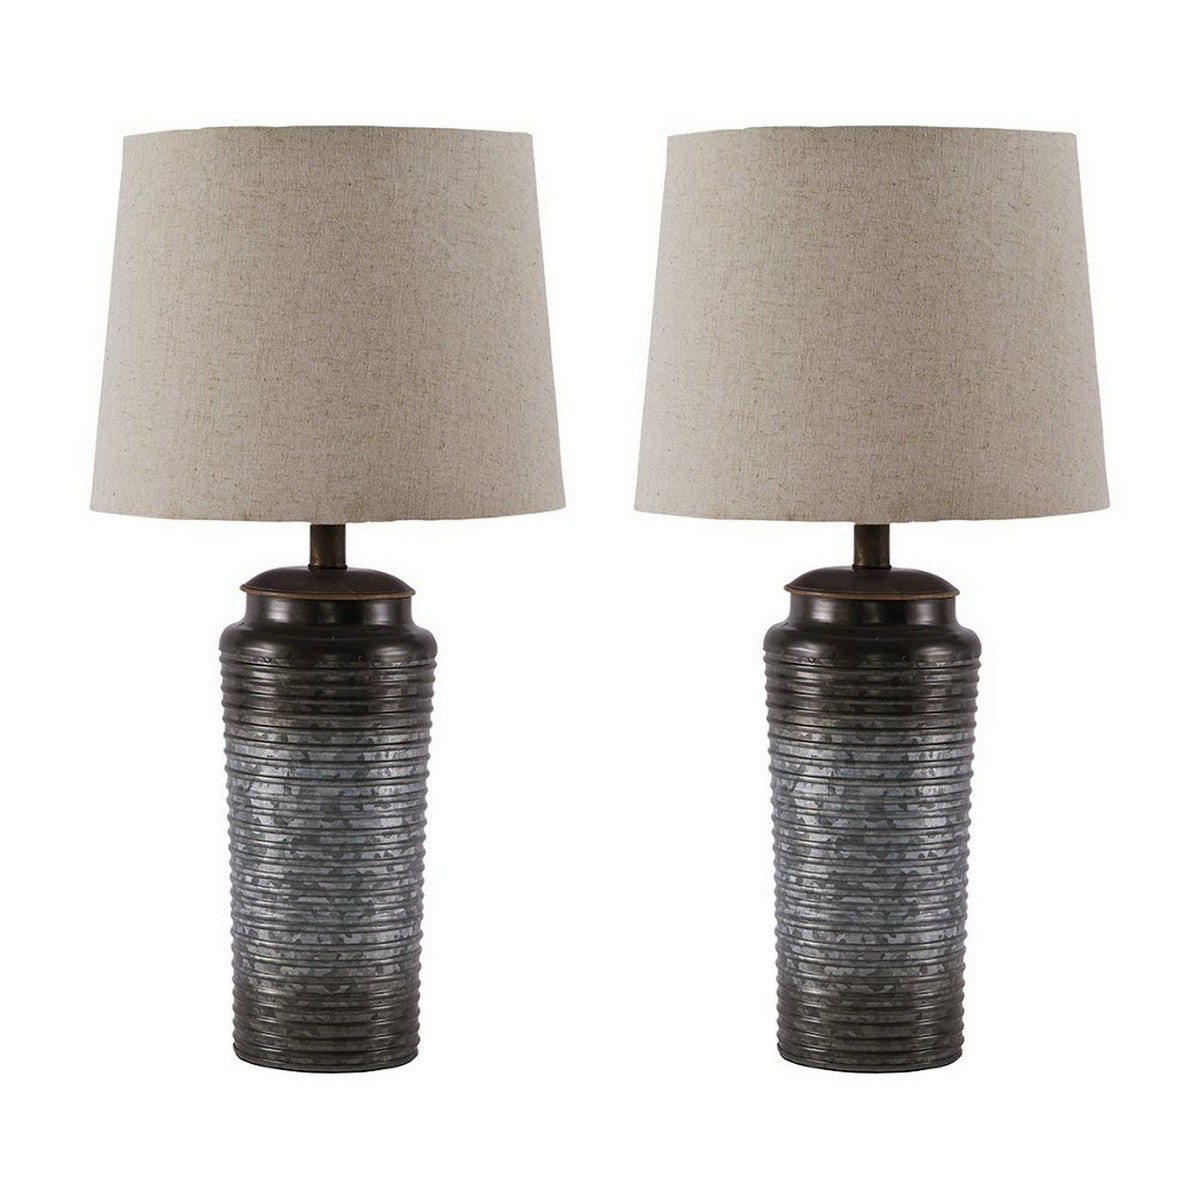 Ribbed Design Metal Body Table Lamp with Tapered Fabric Shade,Set of 2,Gray - BM227191